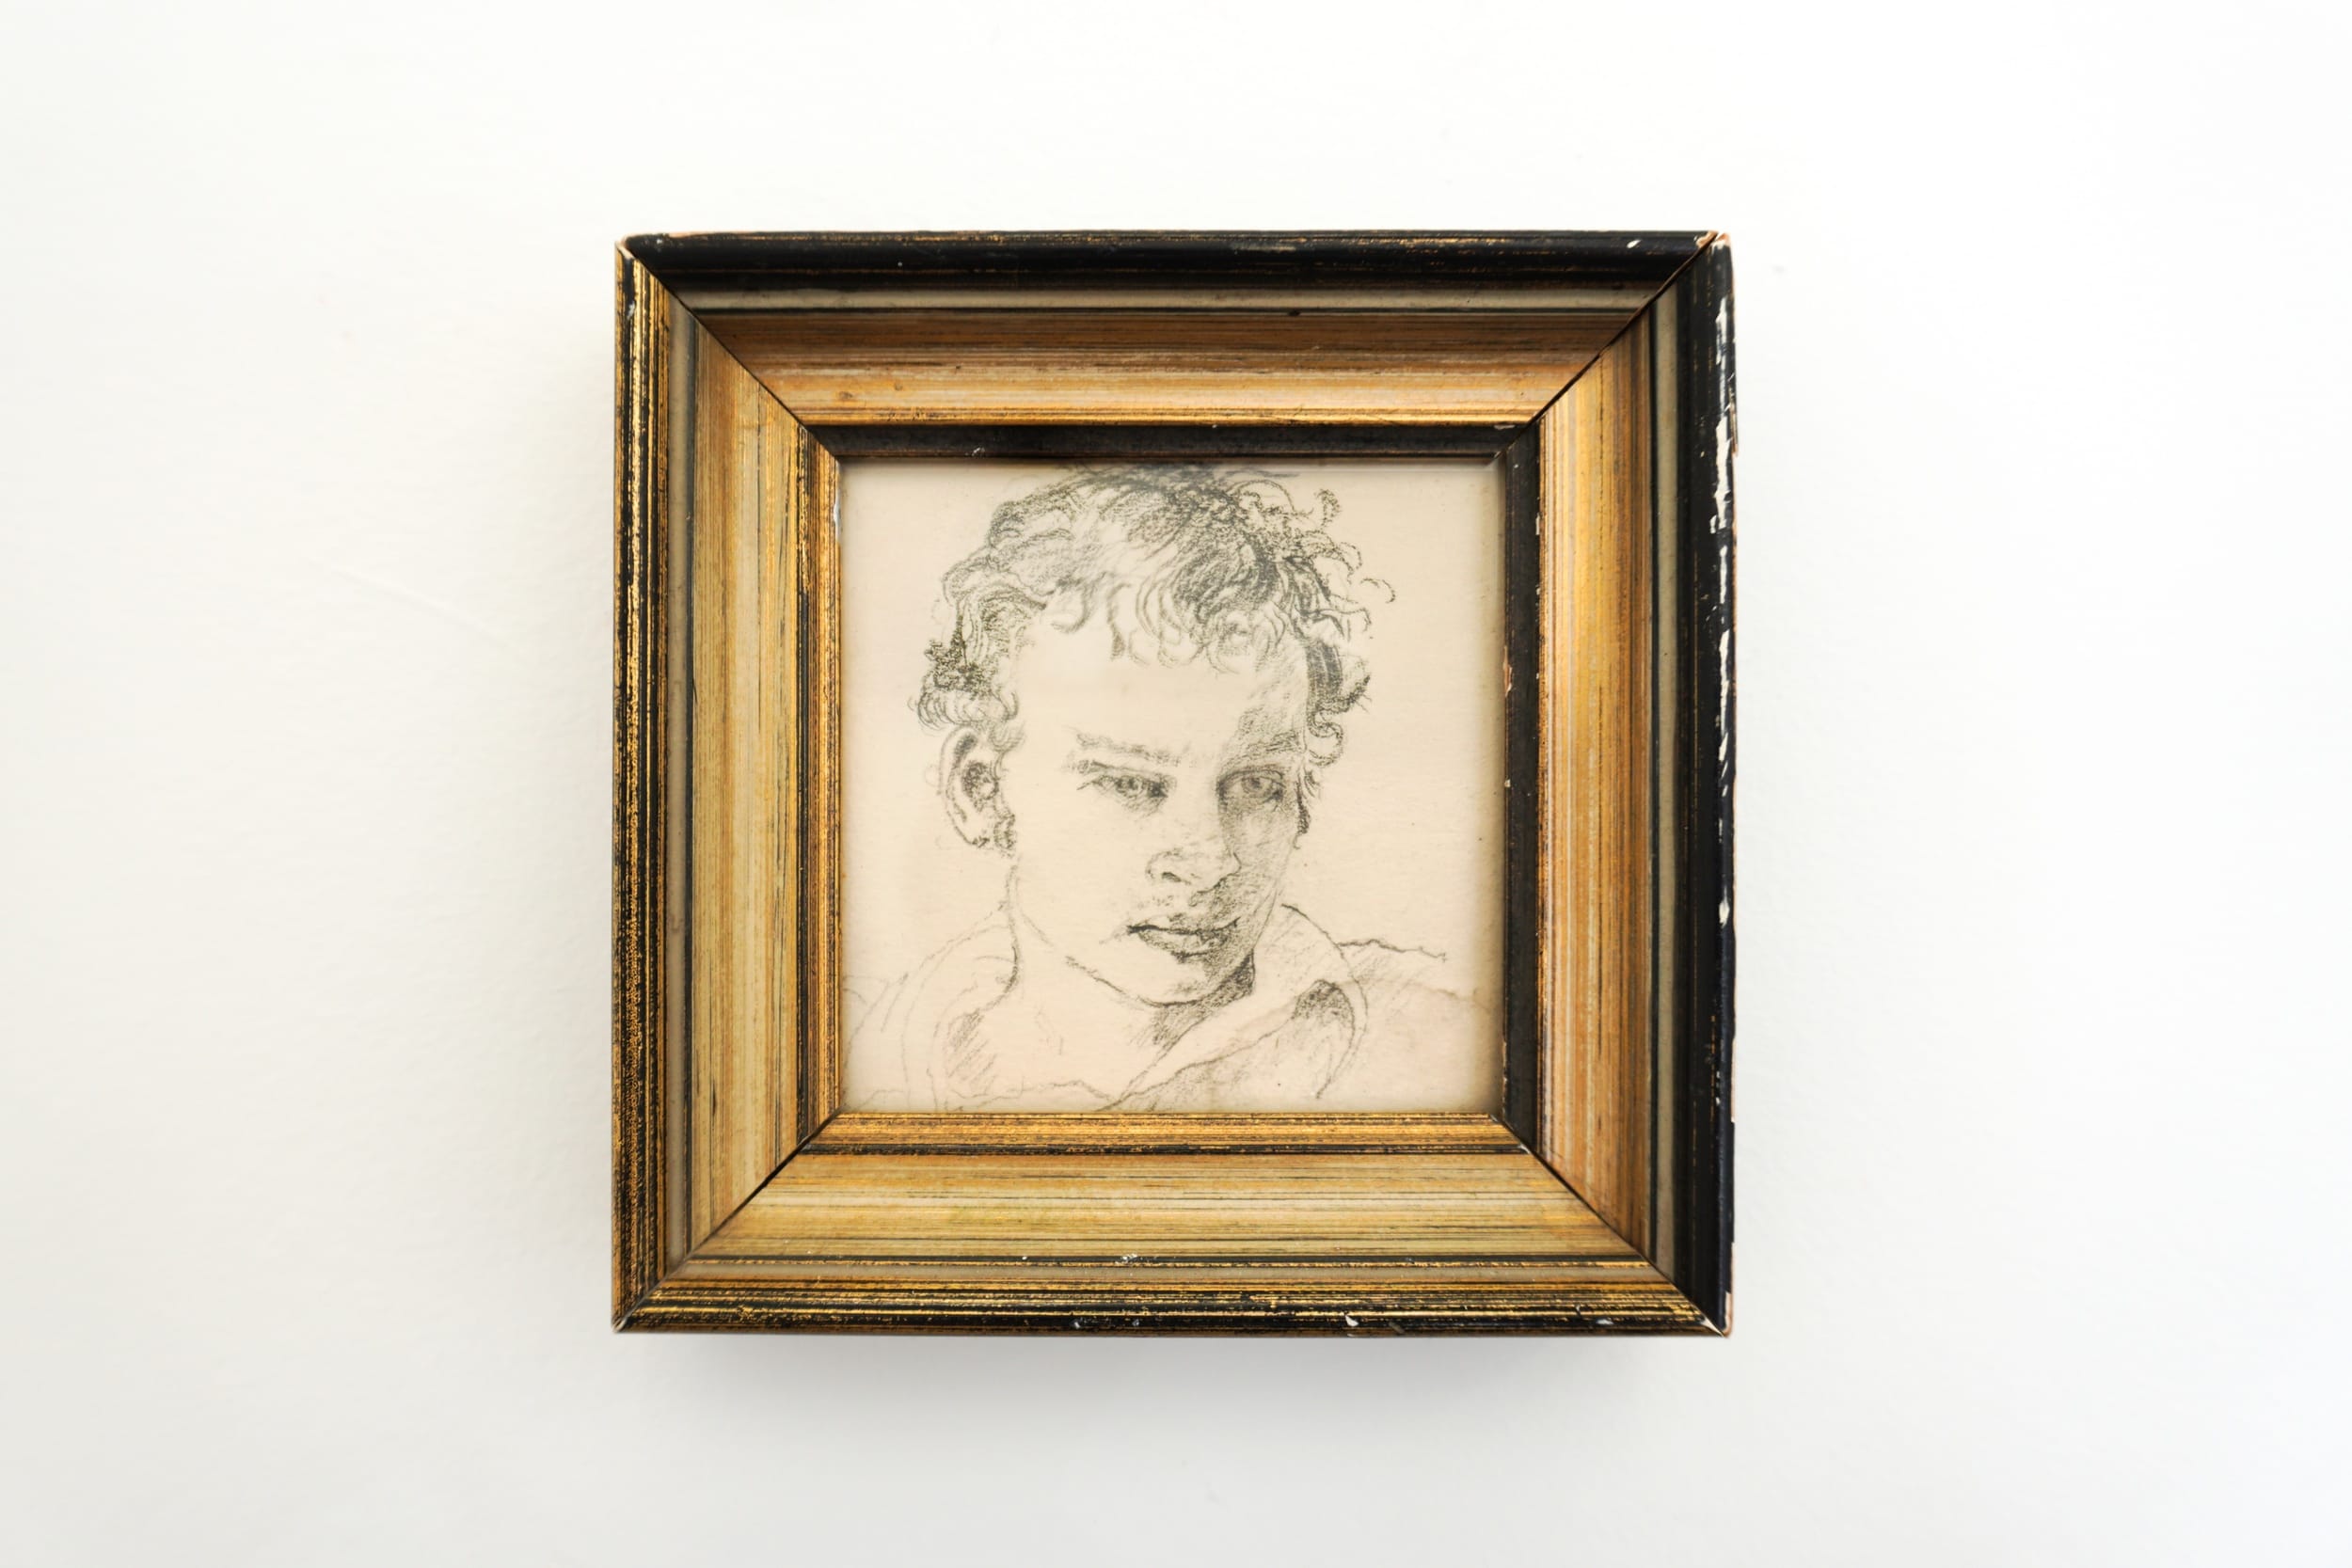  Curt McDowell  George , 1974 Graphite on paper 4 x 4 inches 